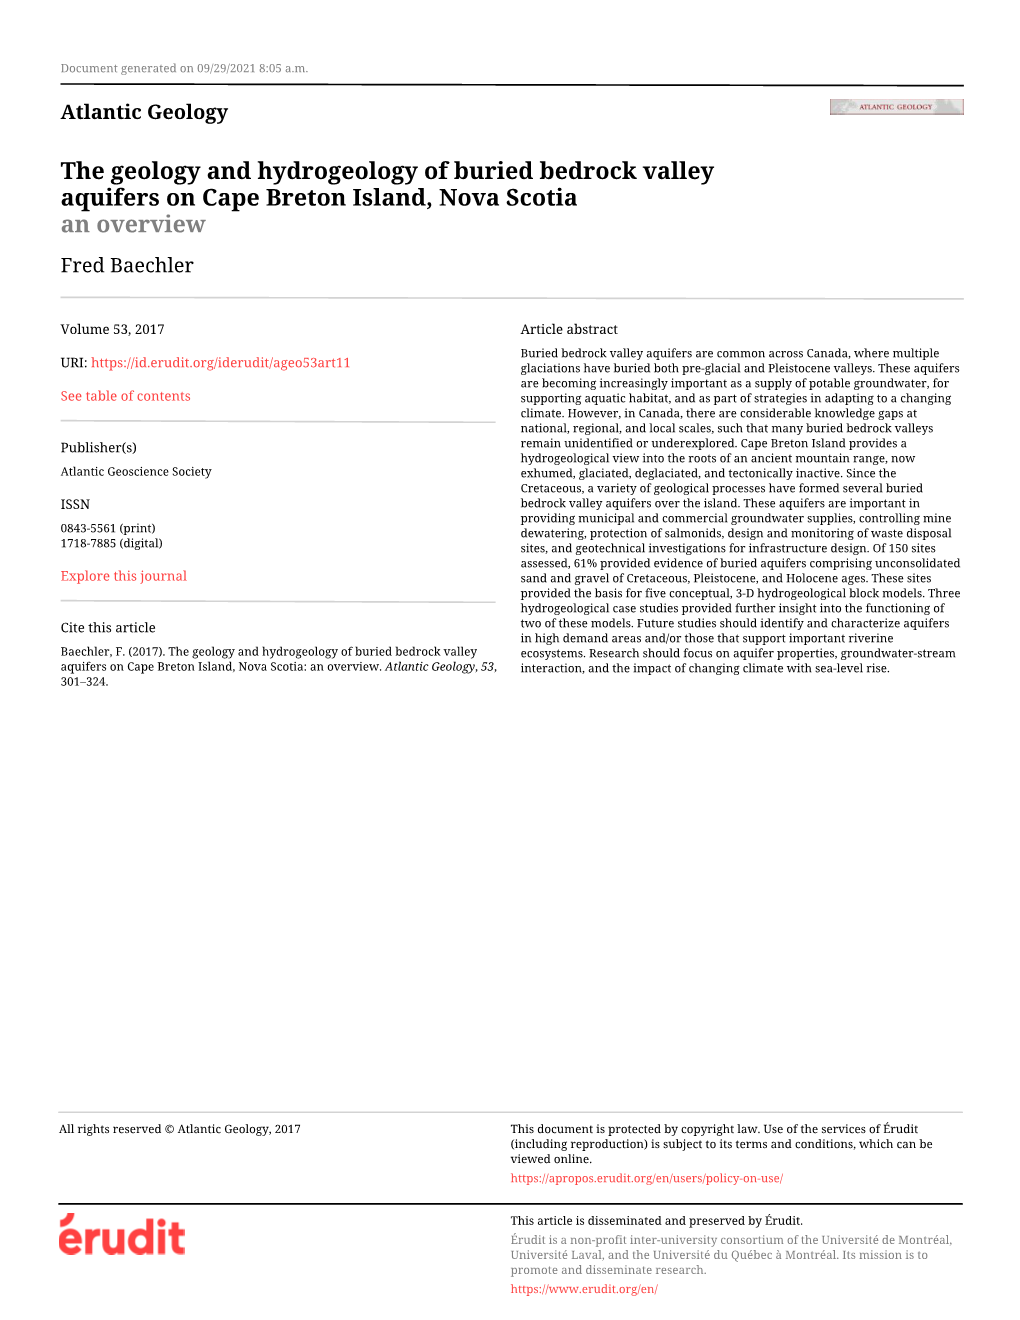 The Geology and Hydrogeology of Buried Bedrock Valley Aquifers on Cape Breton Island, Nova Scotia an Overview Fred Baechler